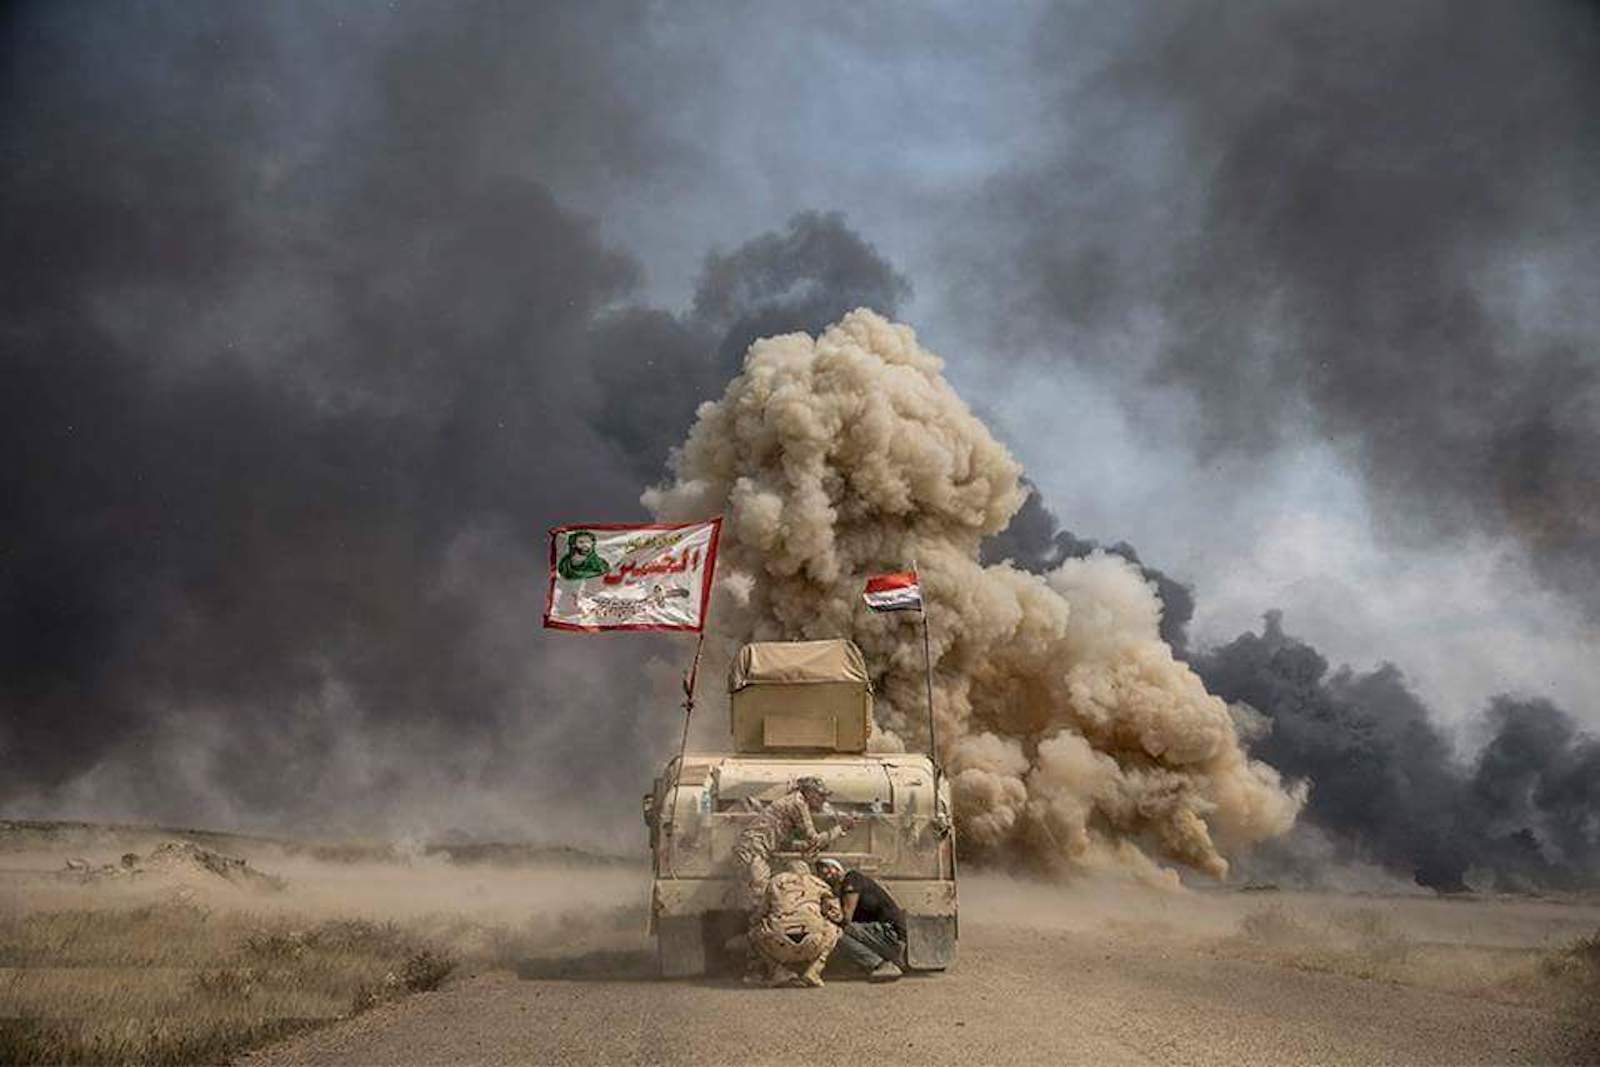 The Iraqi National Army said its troops and federal police liberated the town of Hawija on October 5.